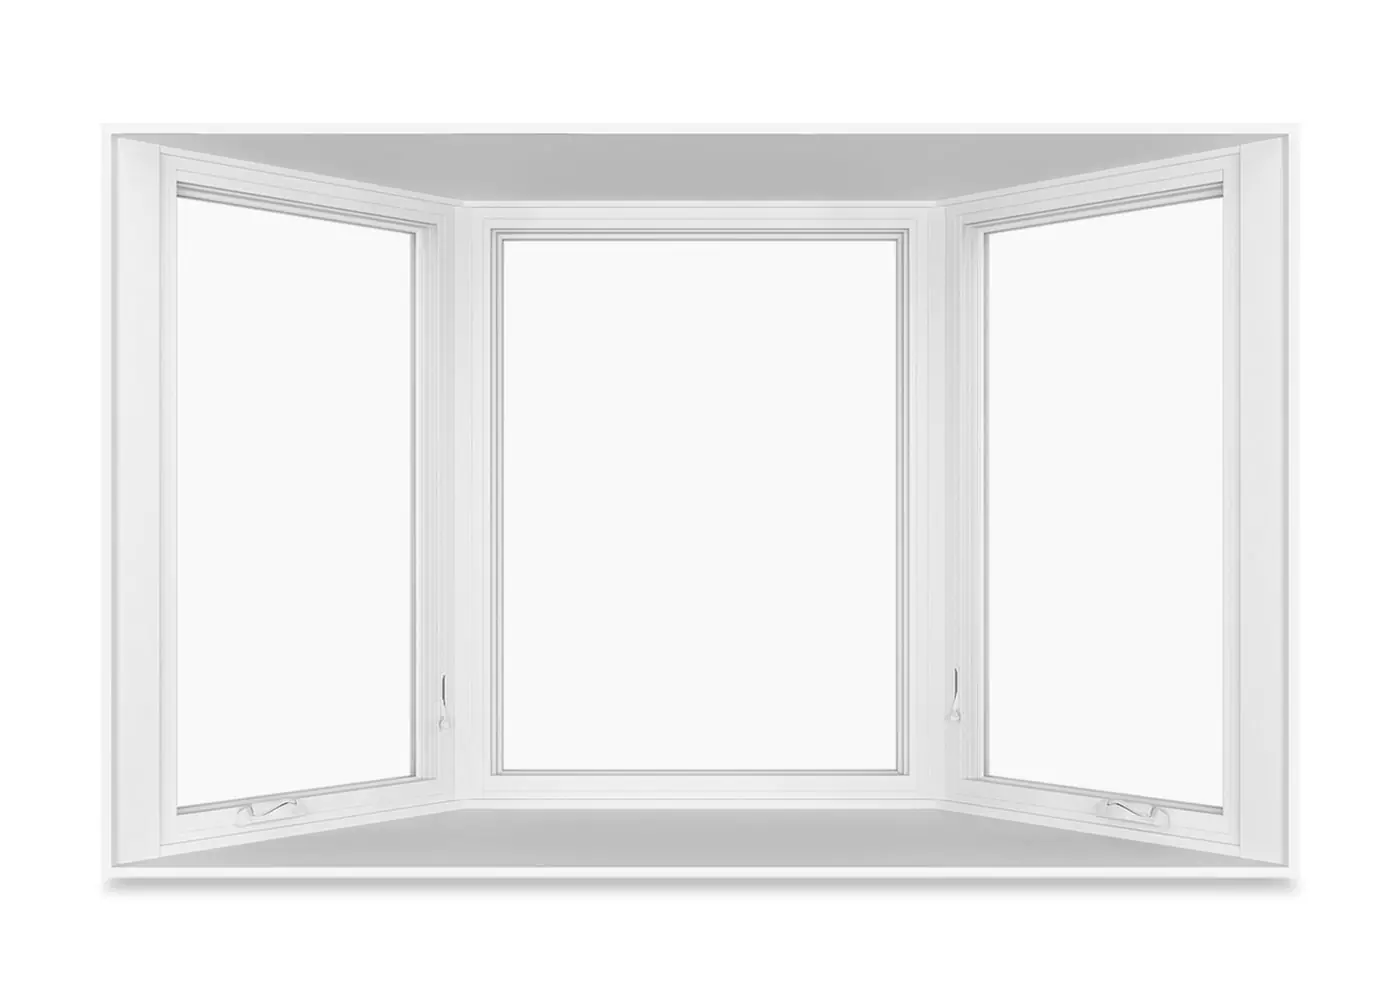 Replacement Casement Bay Window with center picture unit